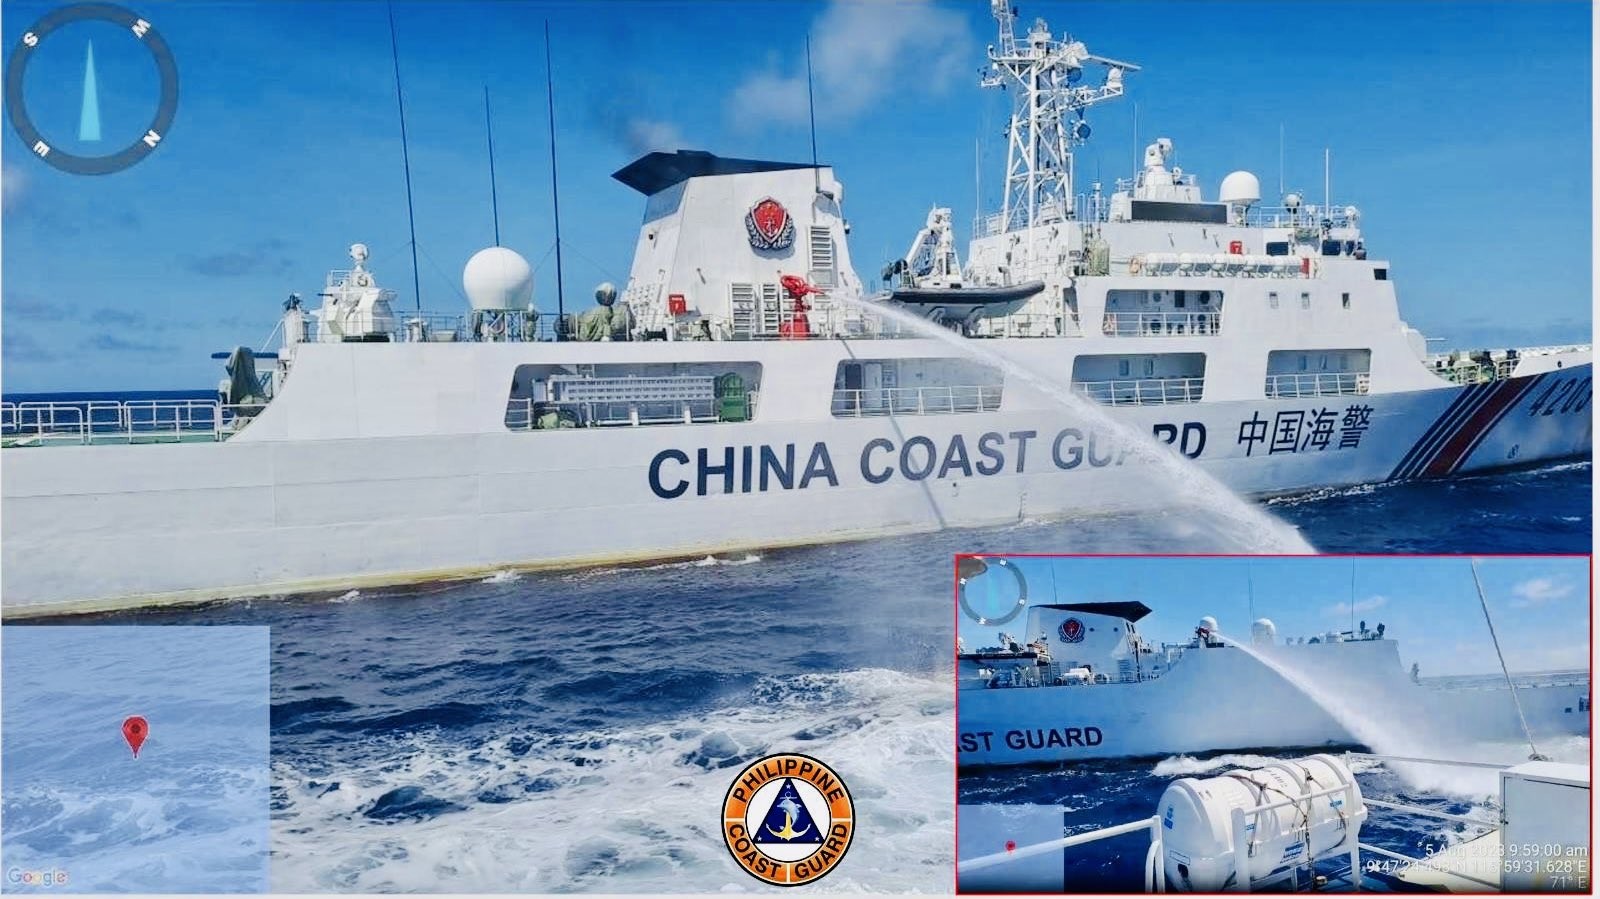 The Philippine Coast Guard (PCG) has condemned the Chinese Coast Guard's (CCG) “illegal” and “dangerous” use of water cannon against its vessels escorting boats delivering supplies to Armed Forces of the Philippines personnel in the West Philippine Sea last Saturday, August 5.